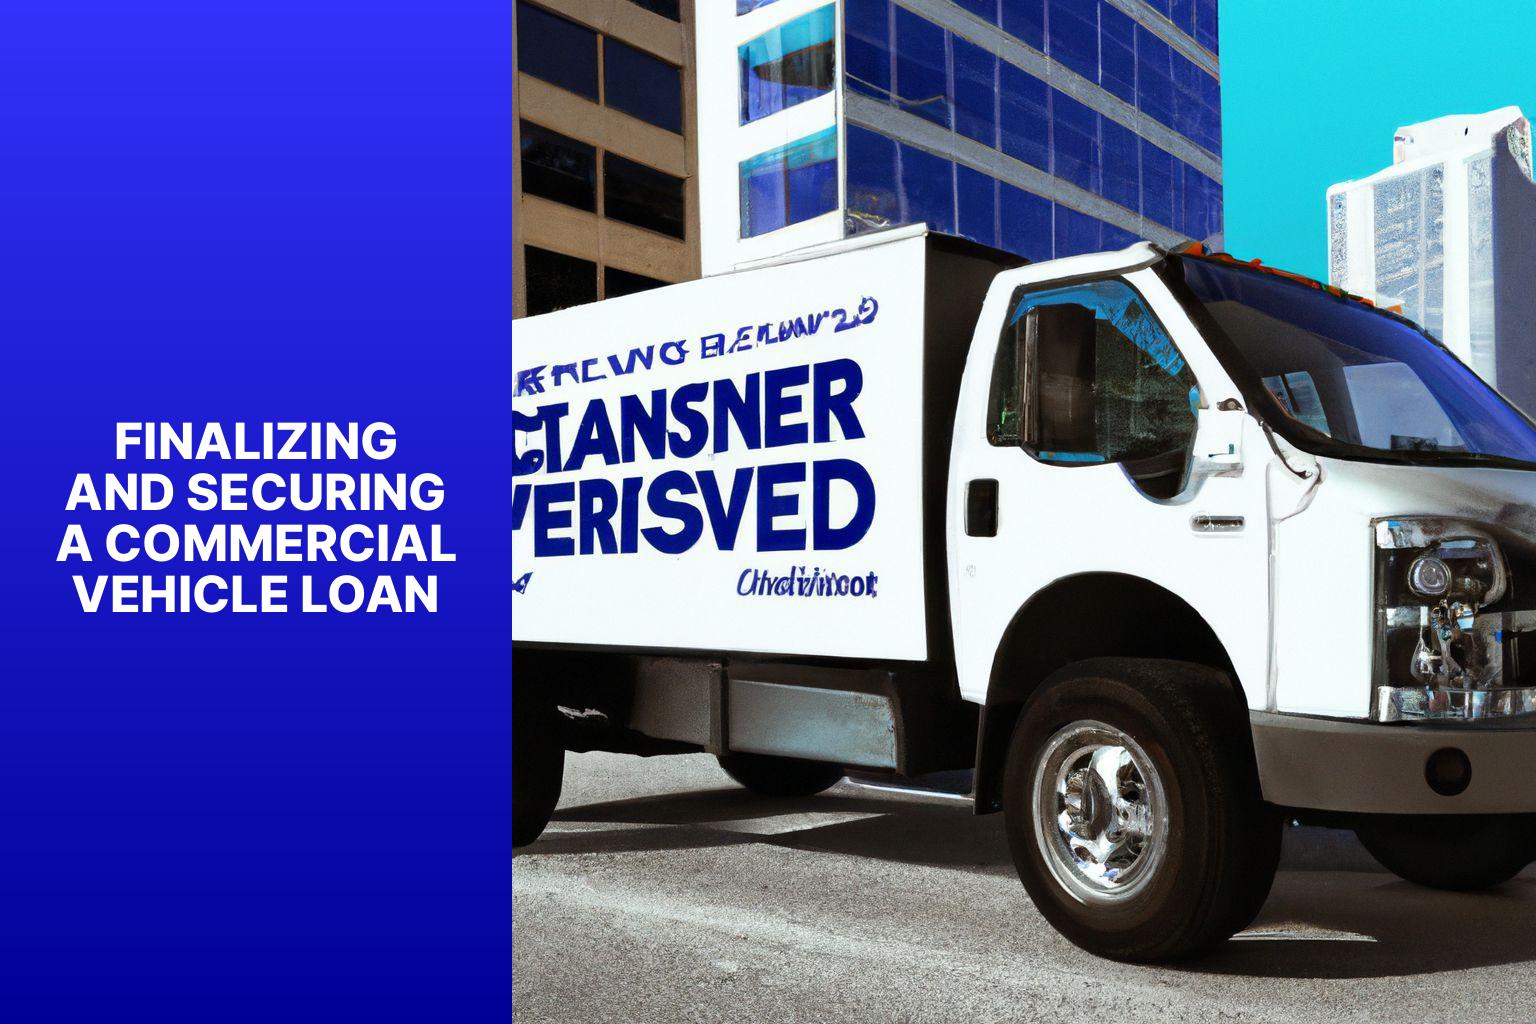 Finalizing and Securing a Commercial Vehicle Loan - Who